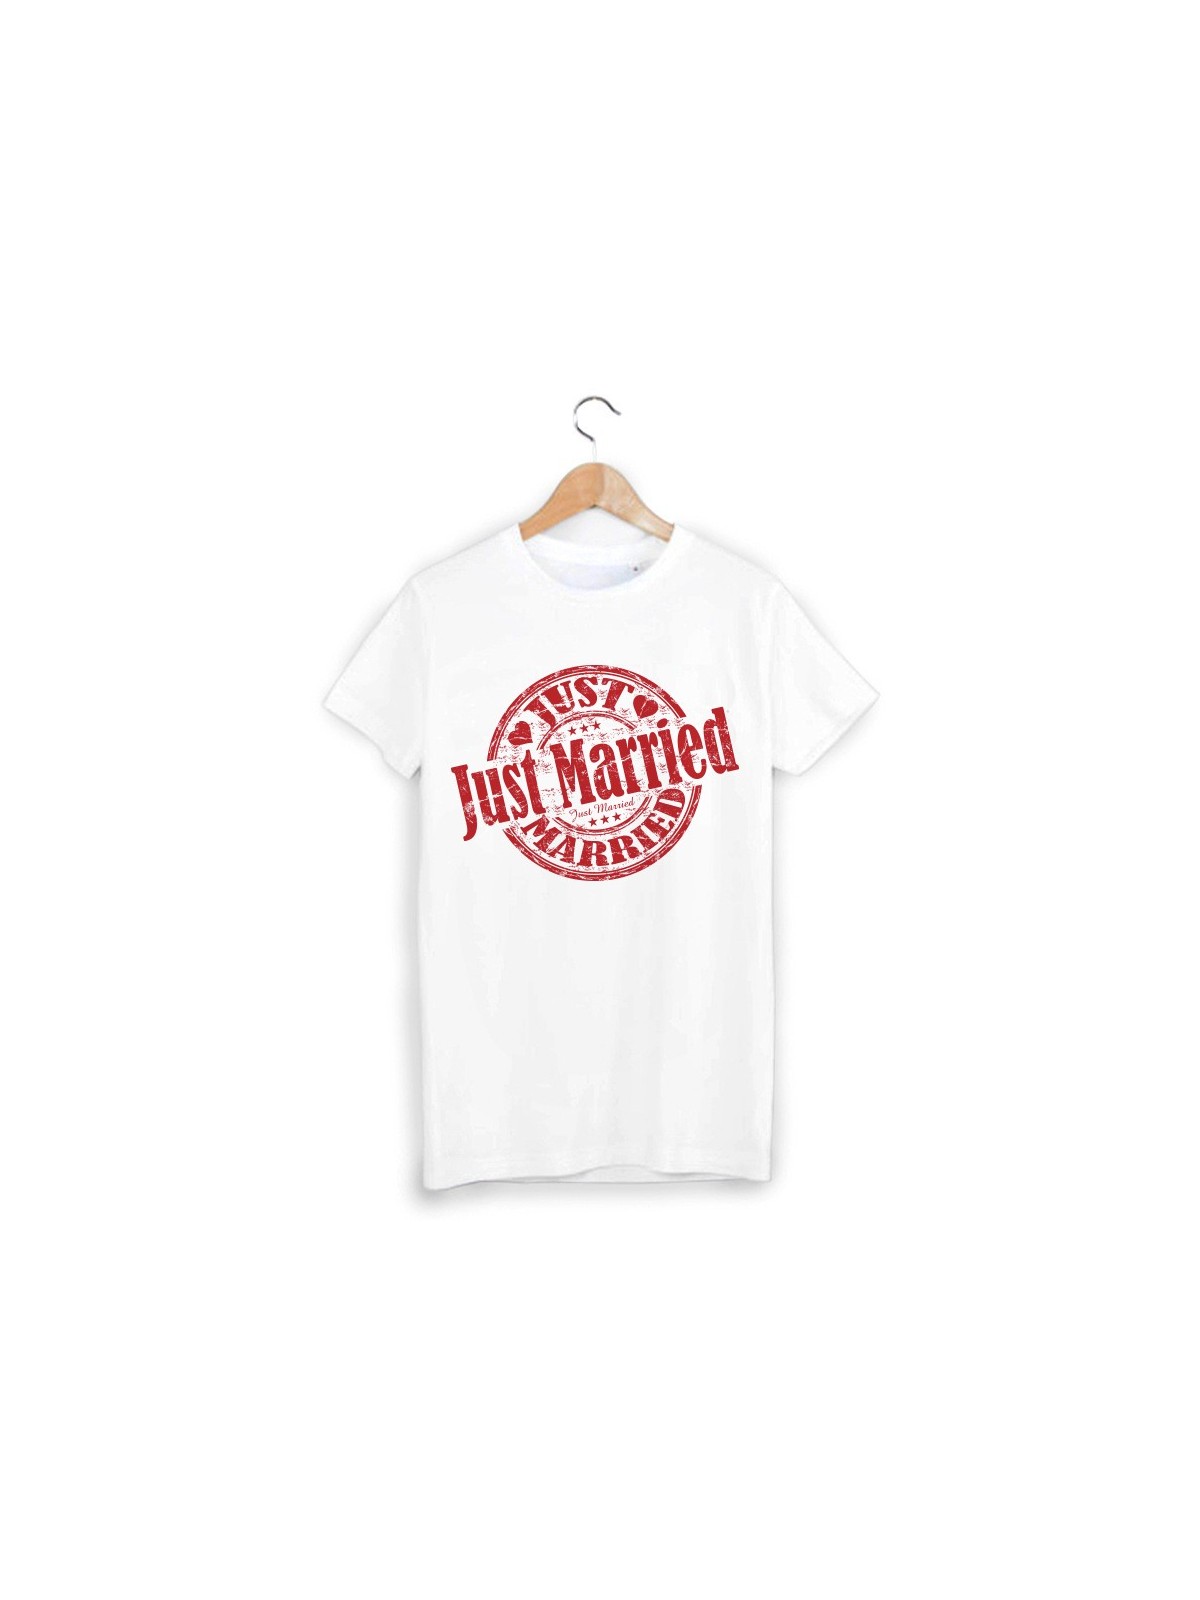 T-Shirt just married ref 1523